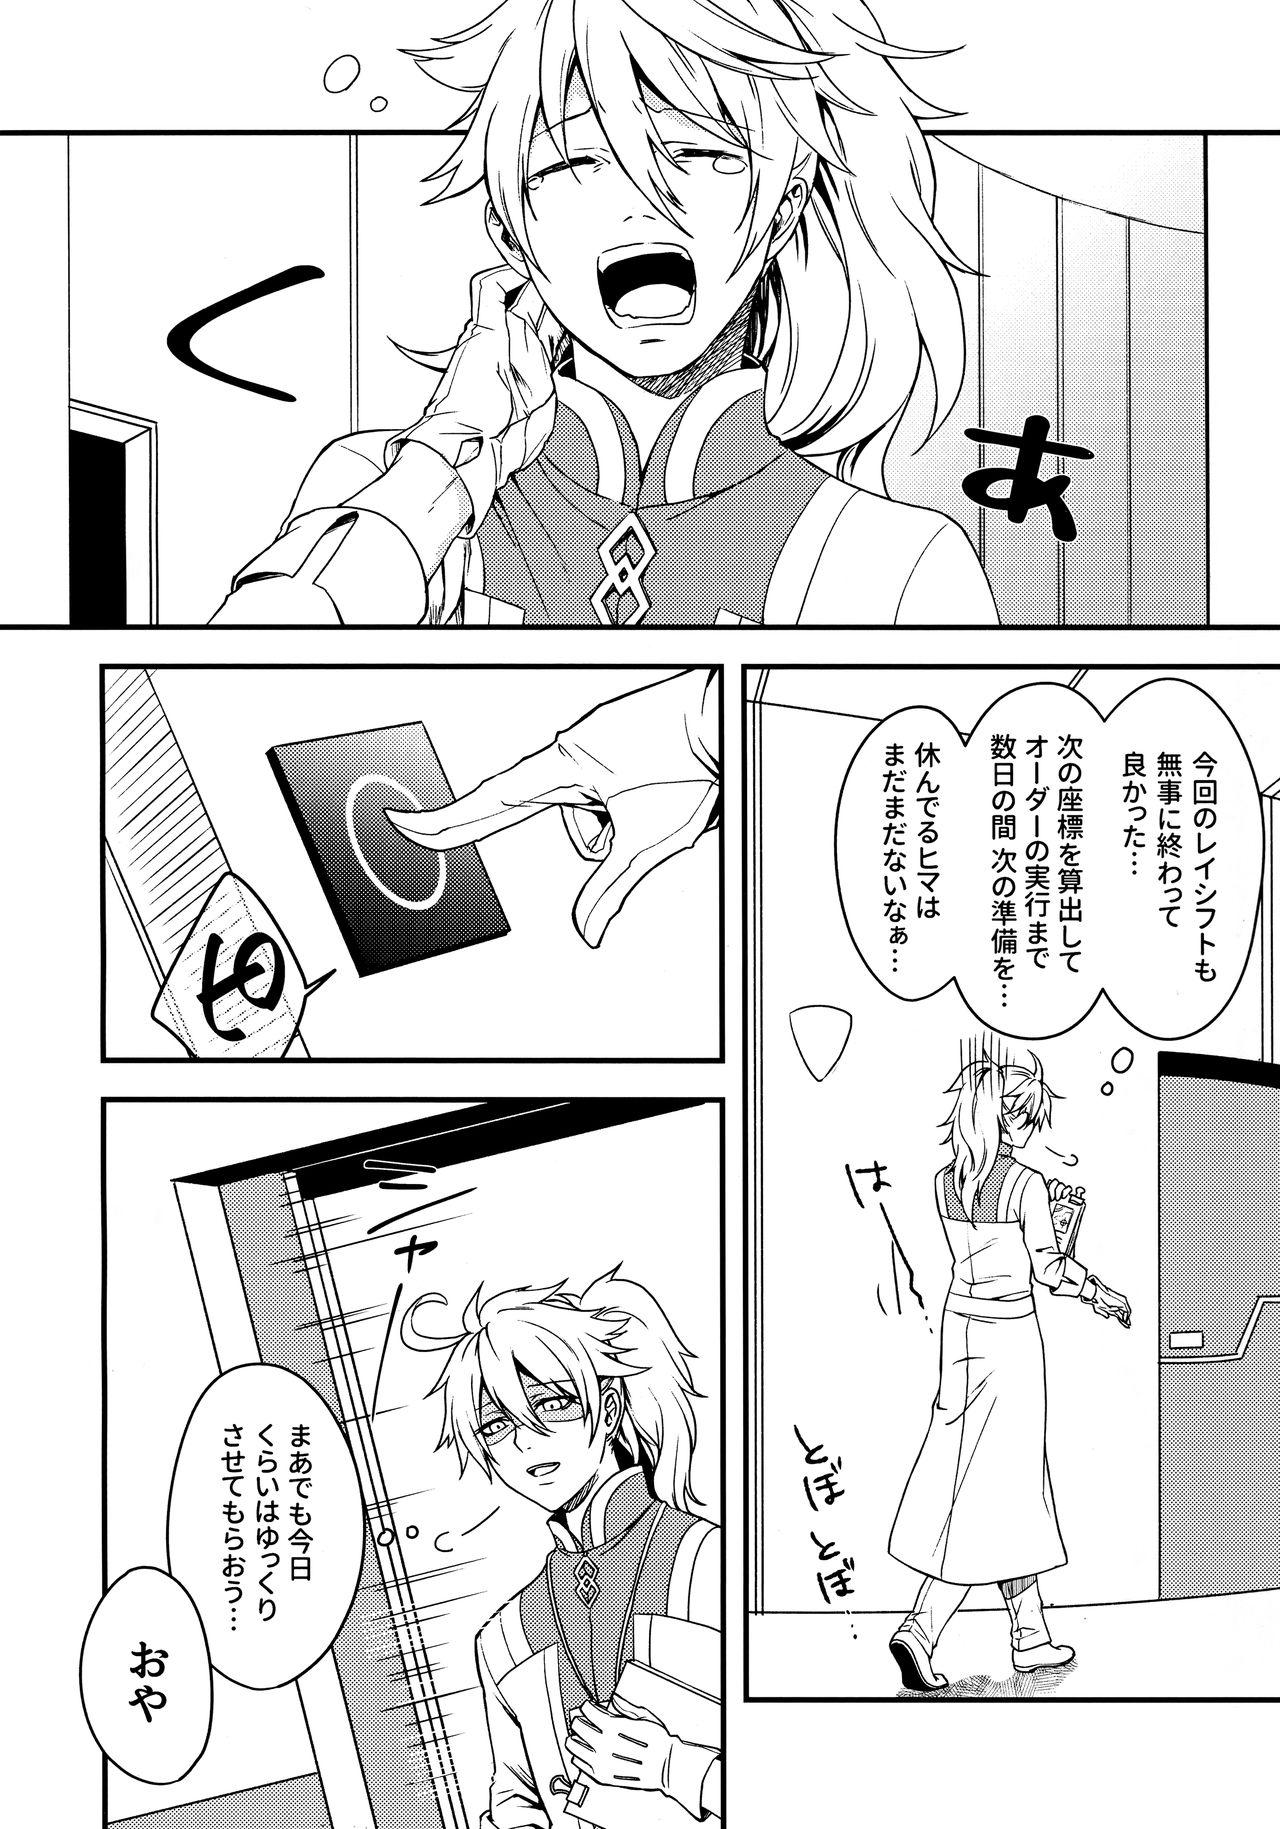 Naughty Ermafrodito! - Fate grand order Swallowing - Page 5